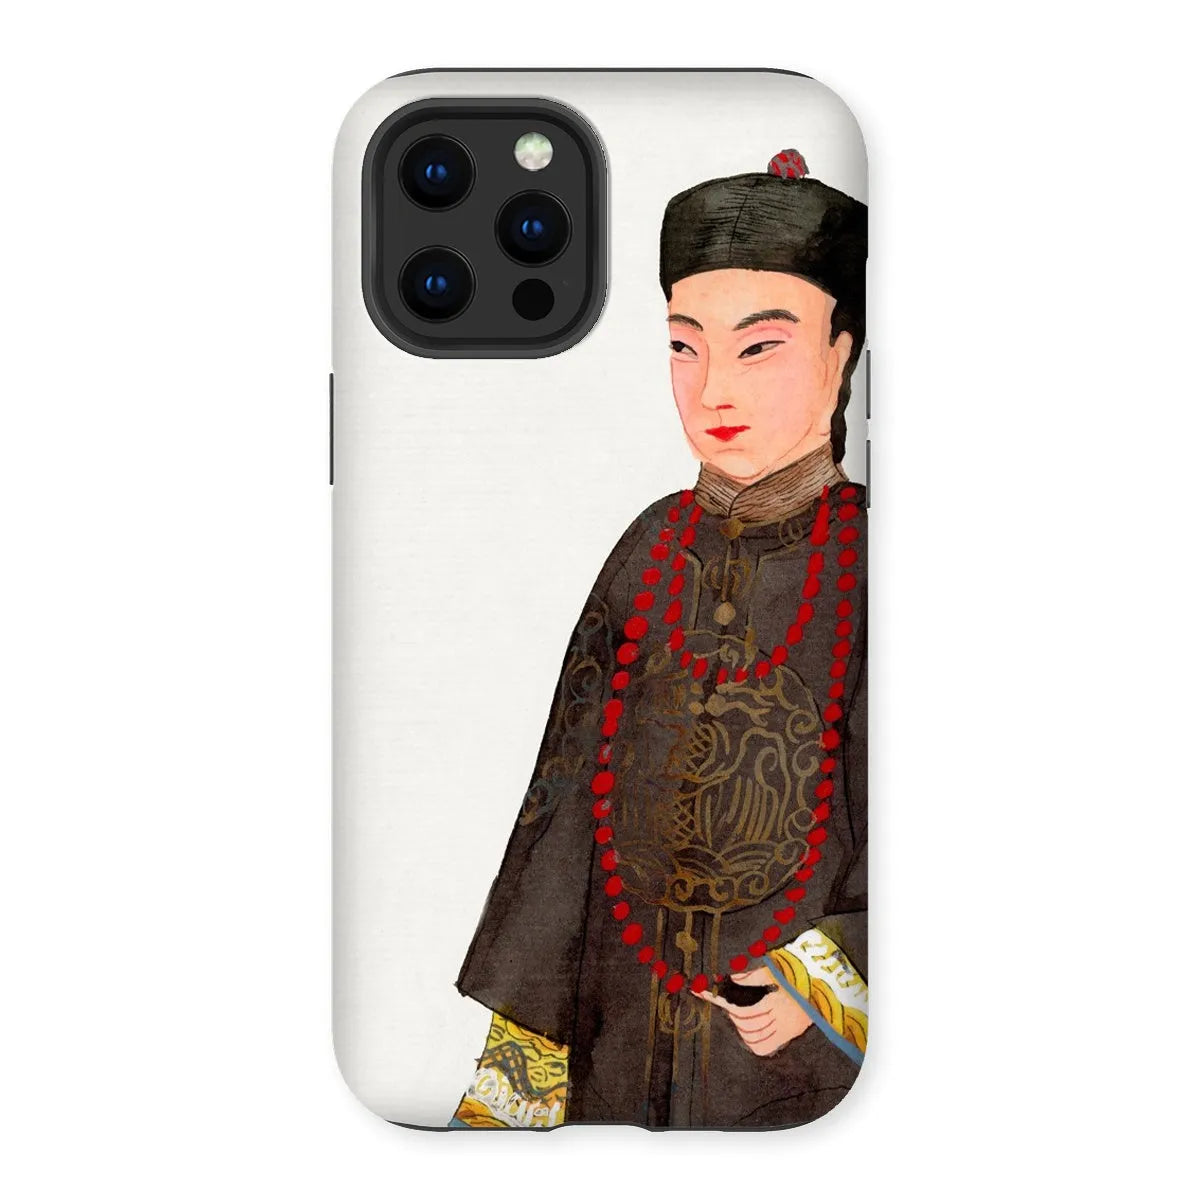 Emperor’s Courtier - Chinese Manchu Aesthetic Art Phone Case - Iphone 12 Pro Max / Matte - Mobile Phone Cases